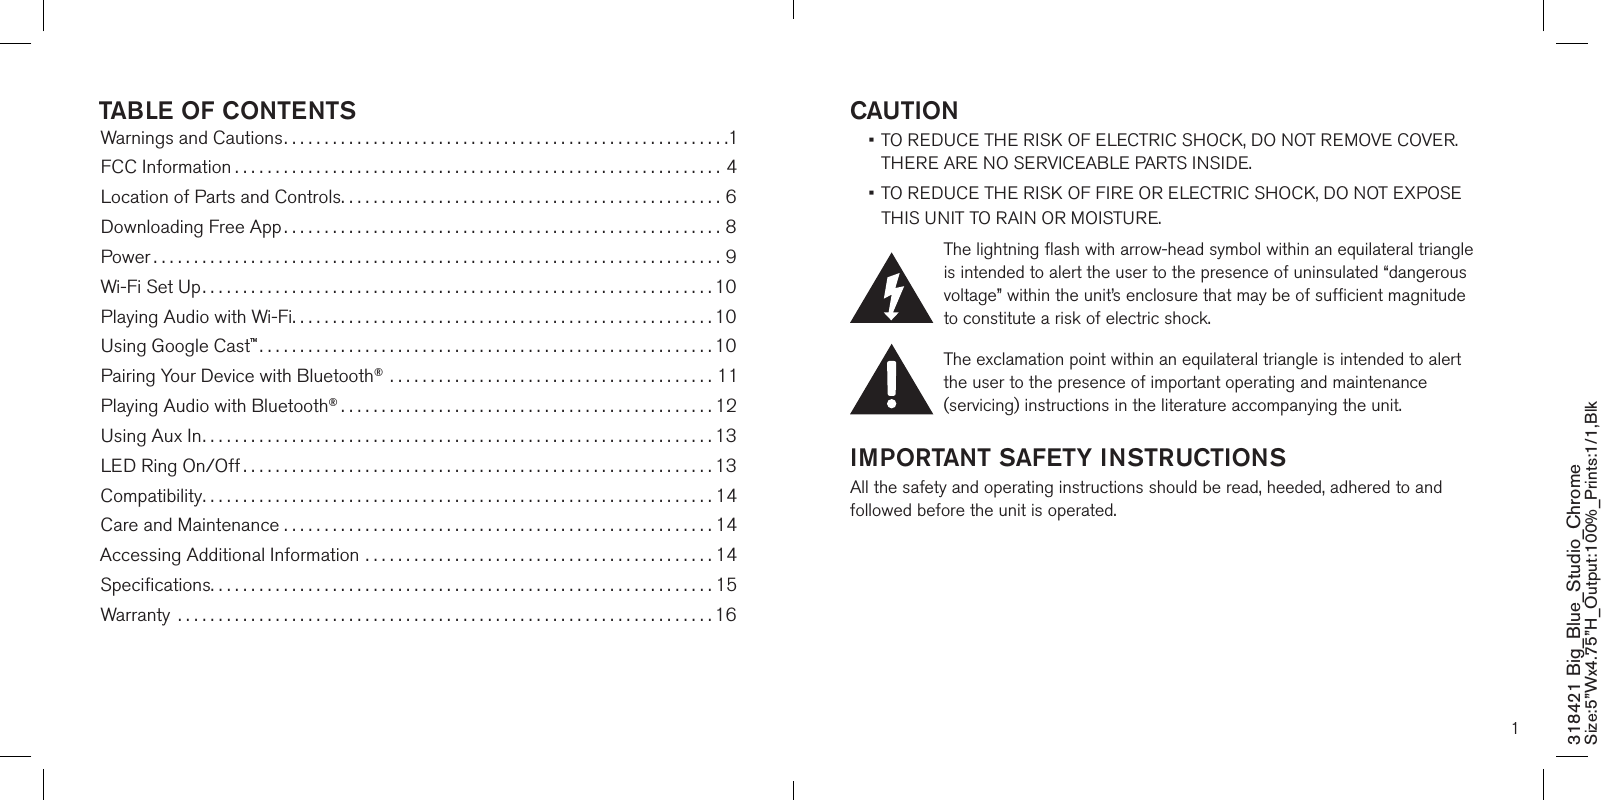 1CAUTION •  TO REDUCE THE RISK OF ELECTRIC SHOCK, DO NOT REMOVE COVER. THERE ARE NO SERVICEABLE PARTS INSIDE.  •  TO REDUCE THE RISK OF FIRE OR ELECTRIC SHOCK, DO NOT EXPOSE  THIS UNIT TO RAIN OR MOISTURE.The lightning flash with arrow-head symbol within an equilateral triangle is intended to alert the user to the presence of uninsulated “dangerous voltage” within the unit’s enclosure that may be of sufficient magnitude to constitute a risk of electric shock.The exclamation point within an equilateral triangle is intended to alert the user to the presence of important operating and maintenance (servicing) instructions in the literature accompanying the unit.IMPORTANT SAFETY INSTRUCTIONSAll the safety and operating instructions should be read, heeded, adhered to and followed before the unit is operated.318421 Big_Blue_Studio_Chrome Size:5”Wx4.75”H_Output:100%_Prints:1/1,Blk TABLE OF CONTENTSWarnings and Cautions.......................................................1FCC Information ............................................................4Location of Parts and Controls...............................................6Downloading Free App......................................................8Power ......................................................................9Wi-Fi Set Up...............................................................10Playing Audio with Wi-Fi....................................................10Using Google Cast™........................................................10Pairing Your Device with Bluetooth® ........................................11Playing Audio with Bluetooth®..............................................12Using Aux In...............................................................13LED Ring On/Off ..........................................................13Compatibility...............................................................14Care and Maintenance . . . . . . . . . . . . . . . . . . . . . . . . . . . . . . . . . . . . . . . . . . . . . . . . . . . . . 14Accessing Additional Information ...........................................14Speciﬁcations..............................................................15Warranty  ..................................................................16